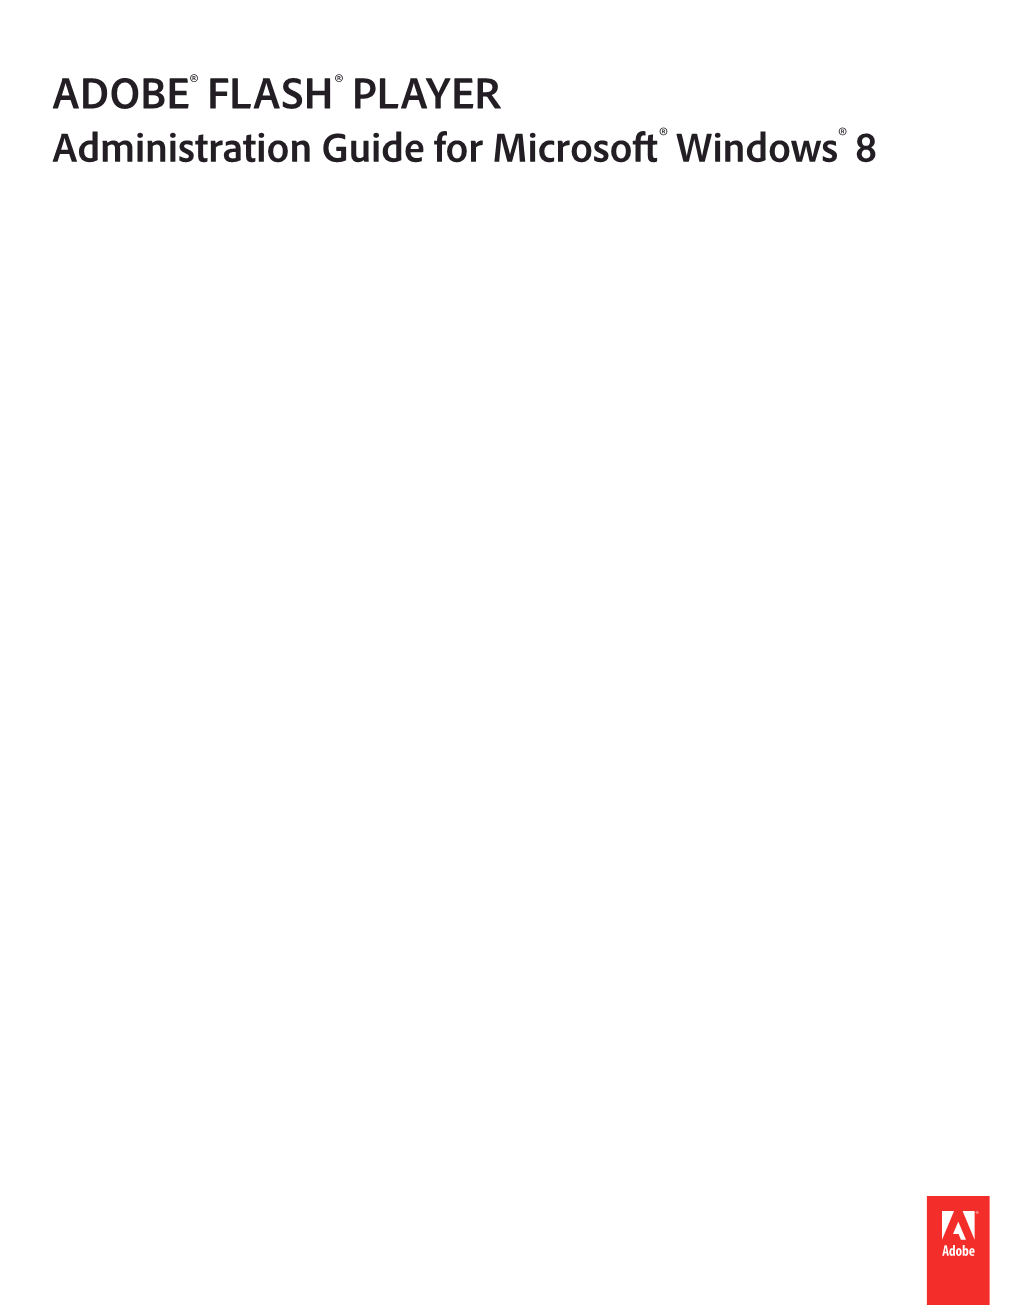 FLASH PLAYER ADMINISTRATION GUIDE for MICROSOFT WINDOWS 8 2 Introduction